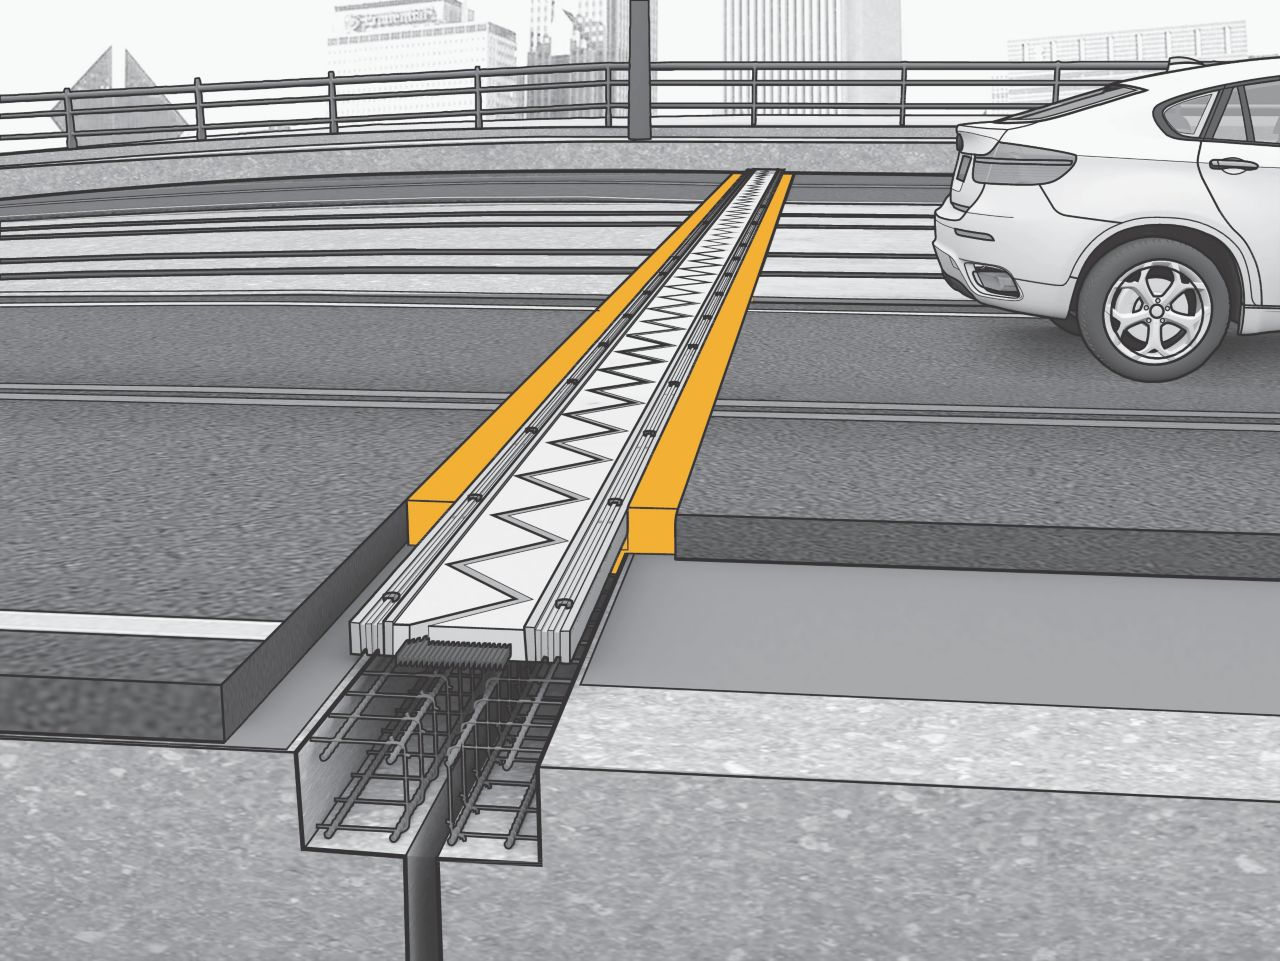 Illustration of bridge deck expansion joint at pavement with car driving over